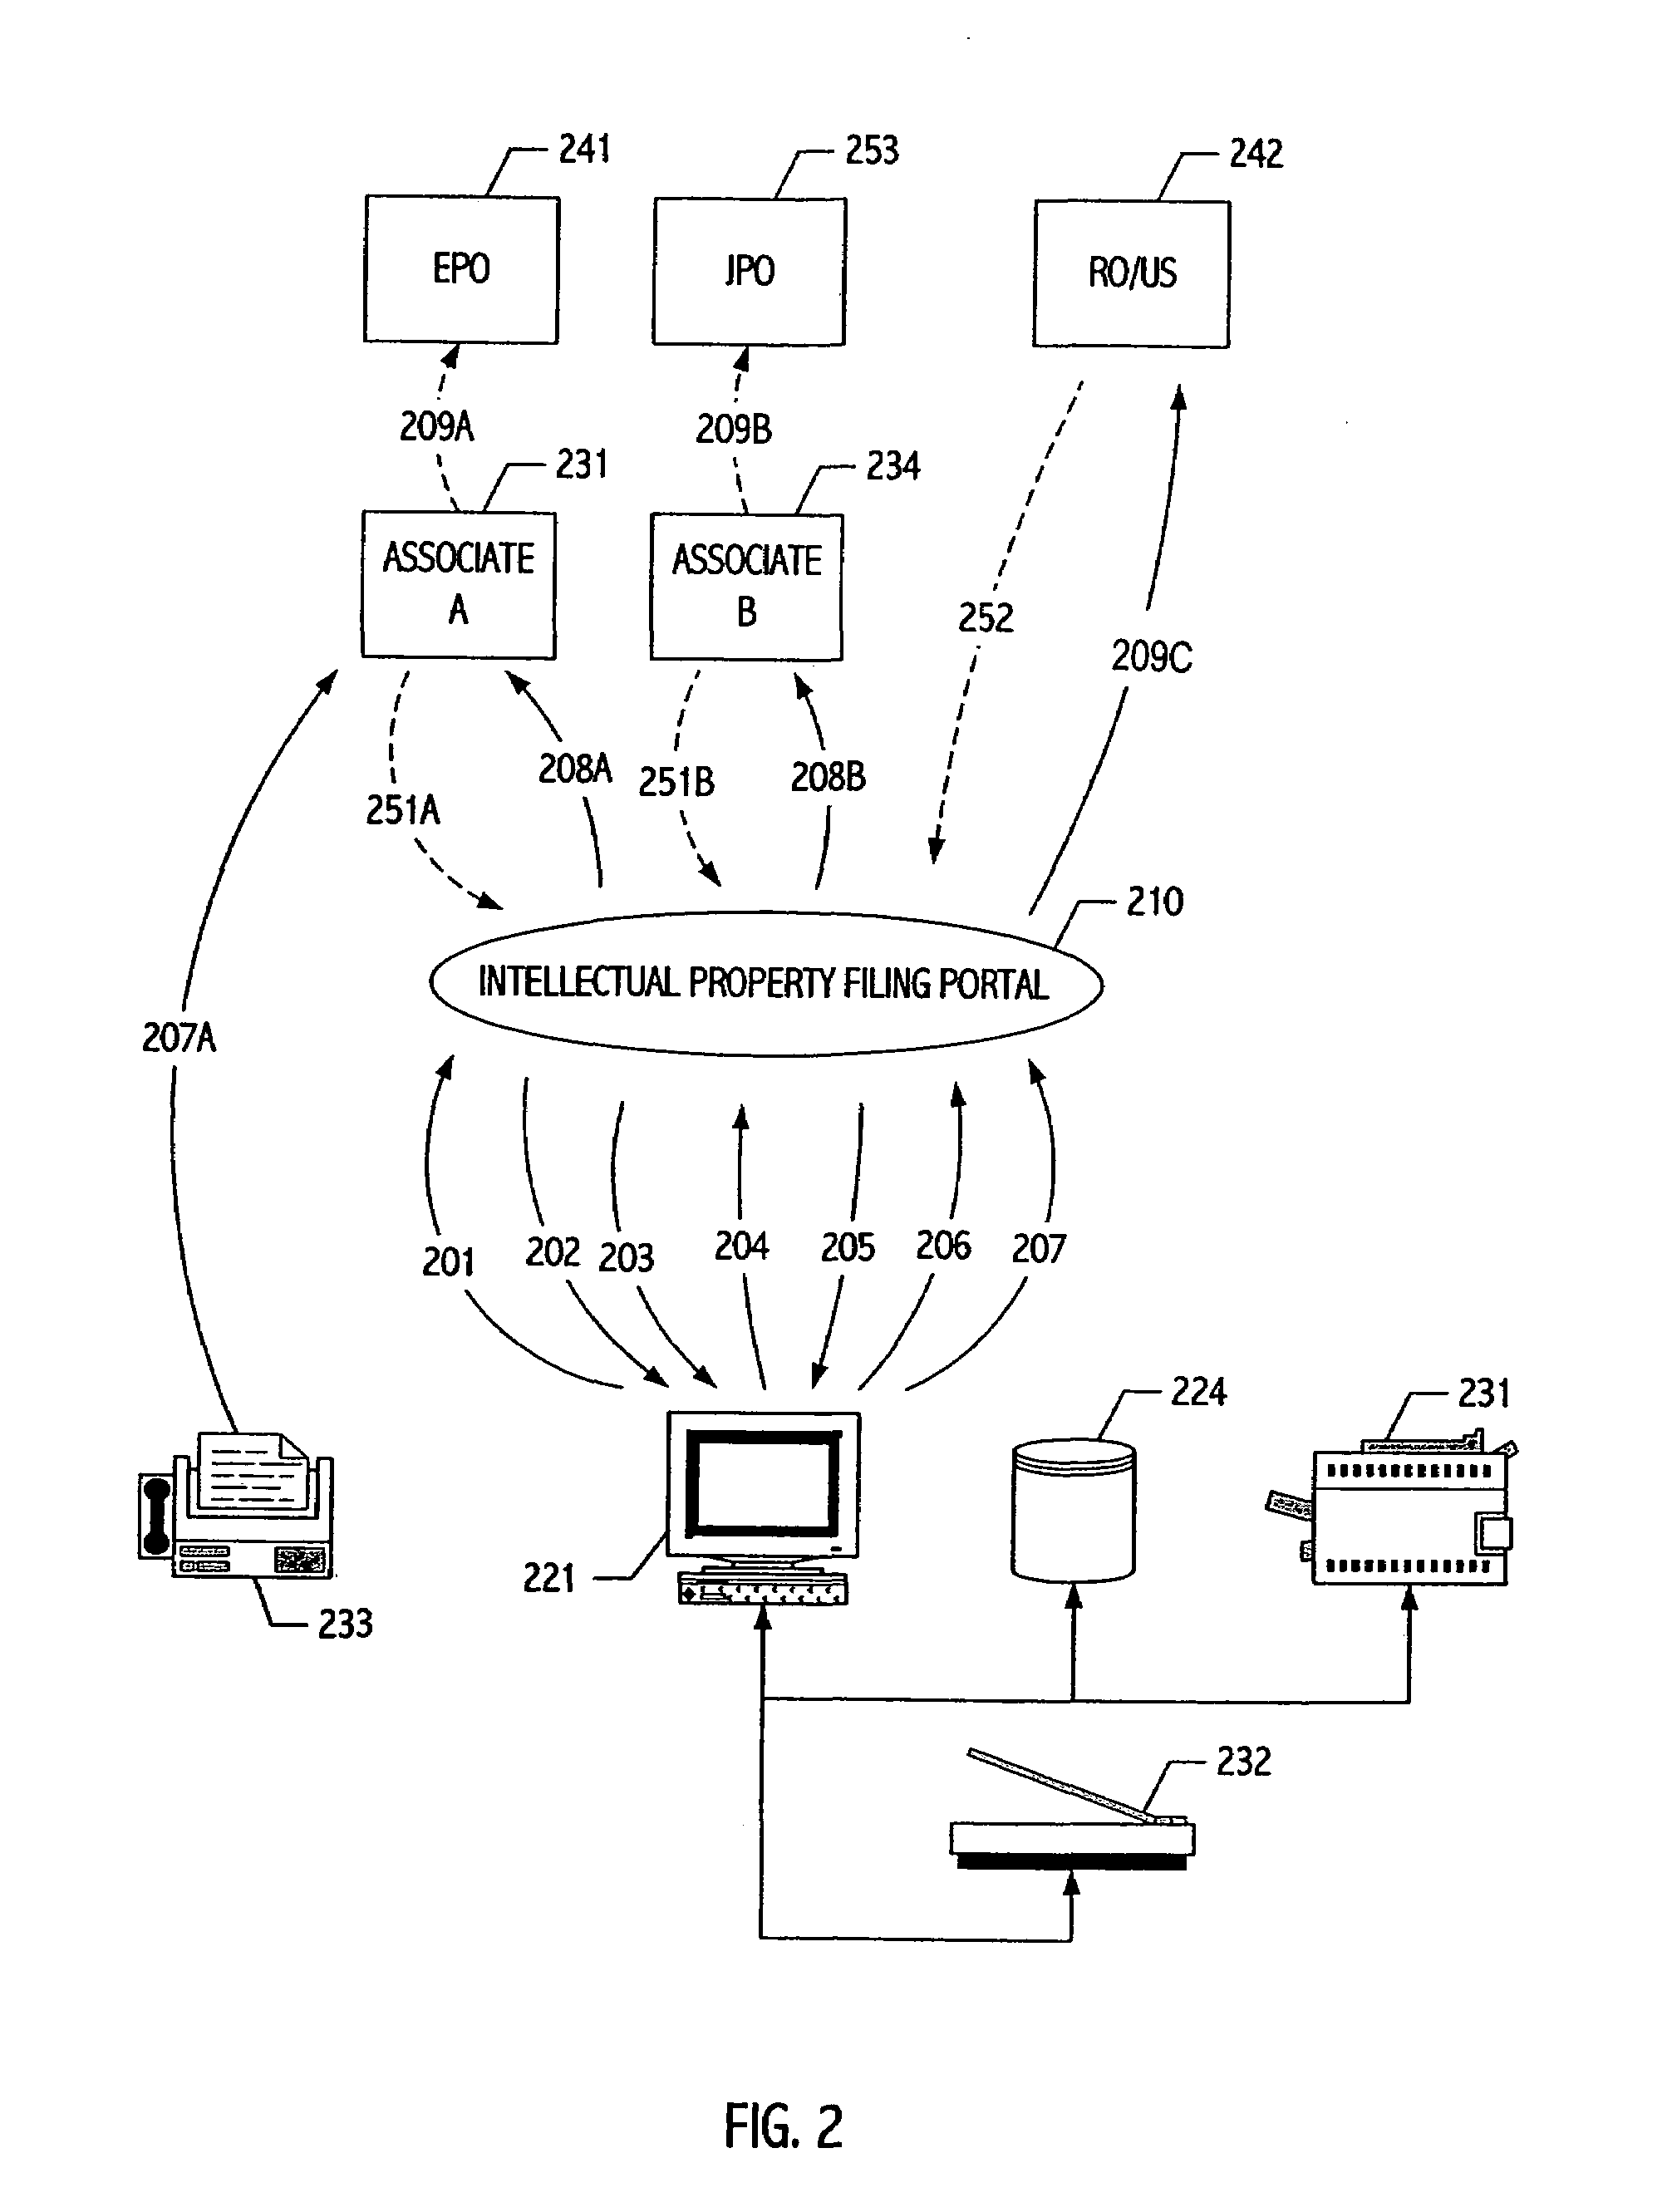 Fee transaction system and method for intellectual property acquisition and/or maintenance